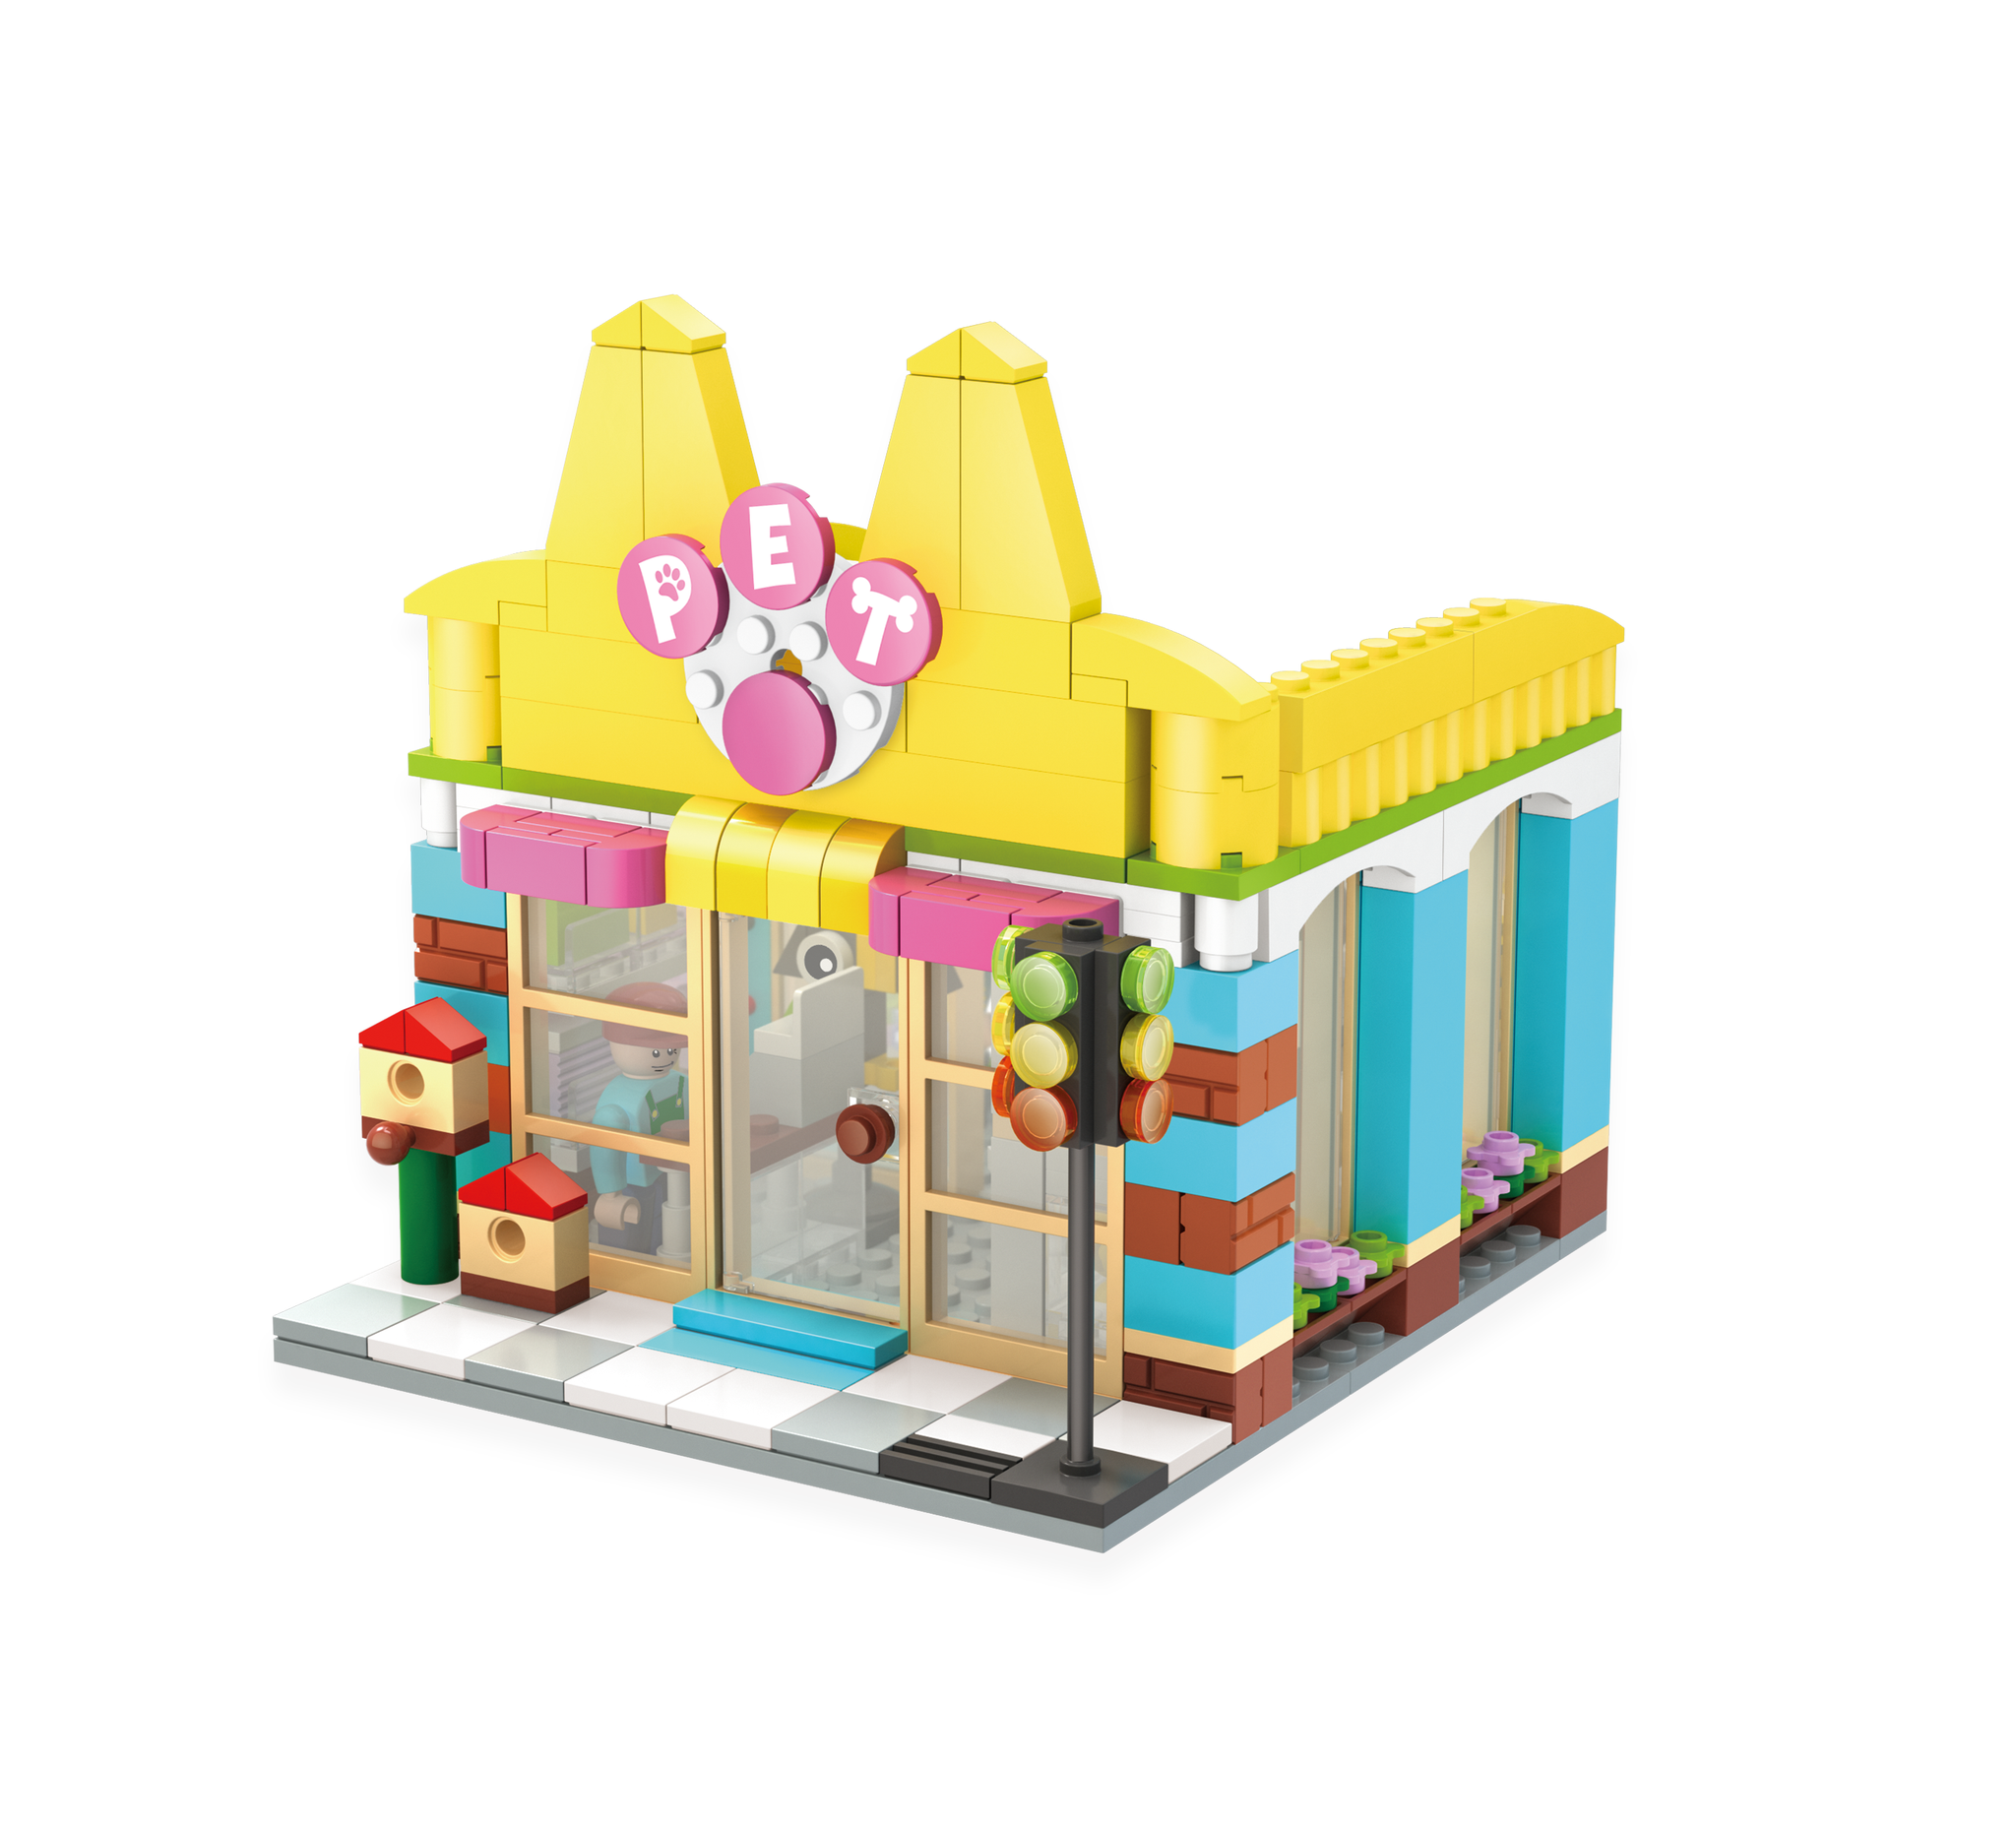 Pet Store Building Block Set with LED Lightbox, Animal Figures and Mini Figures